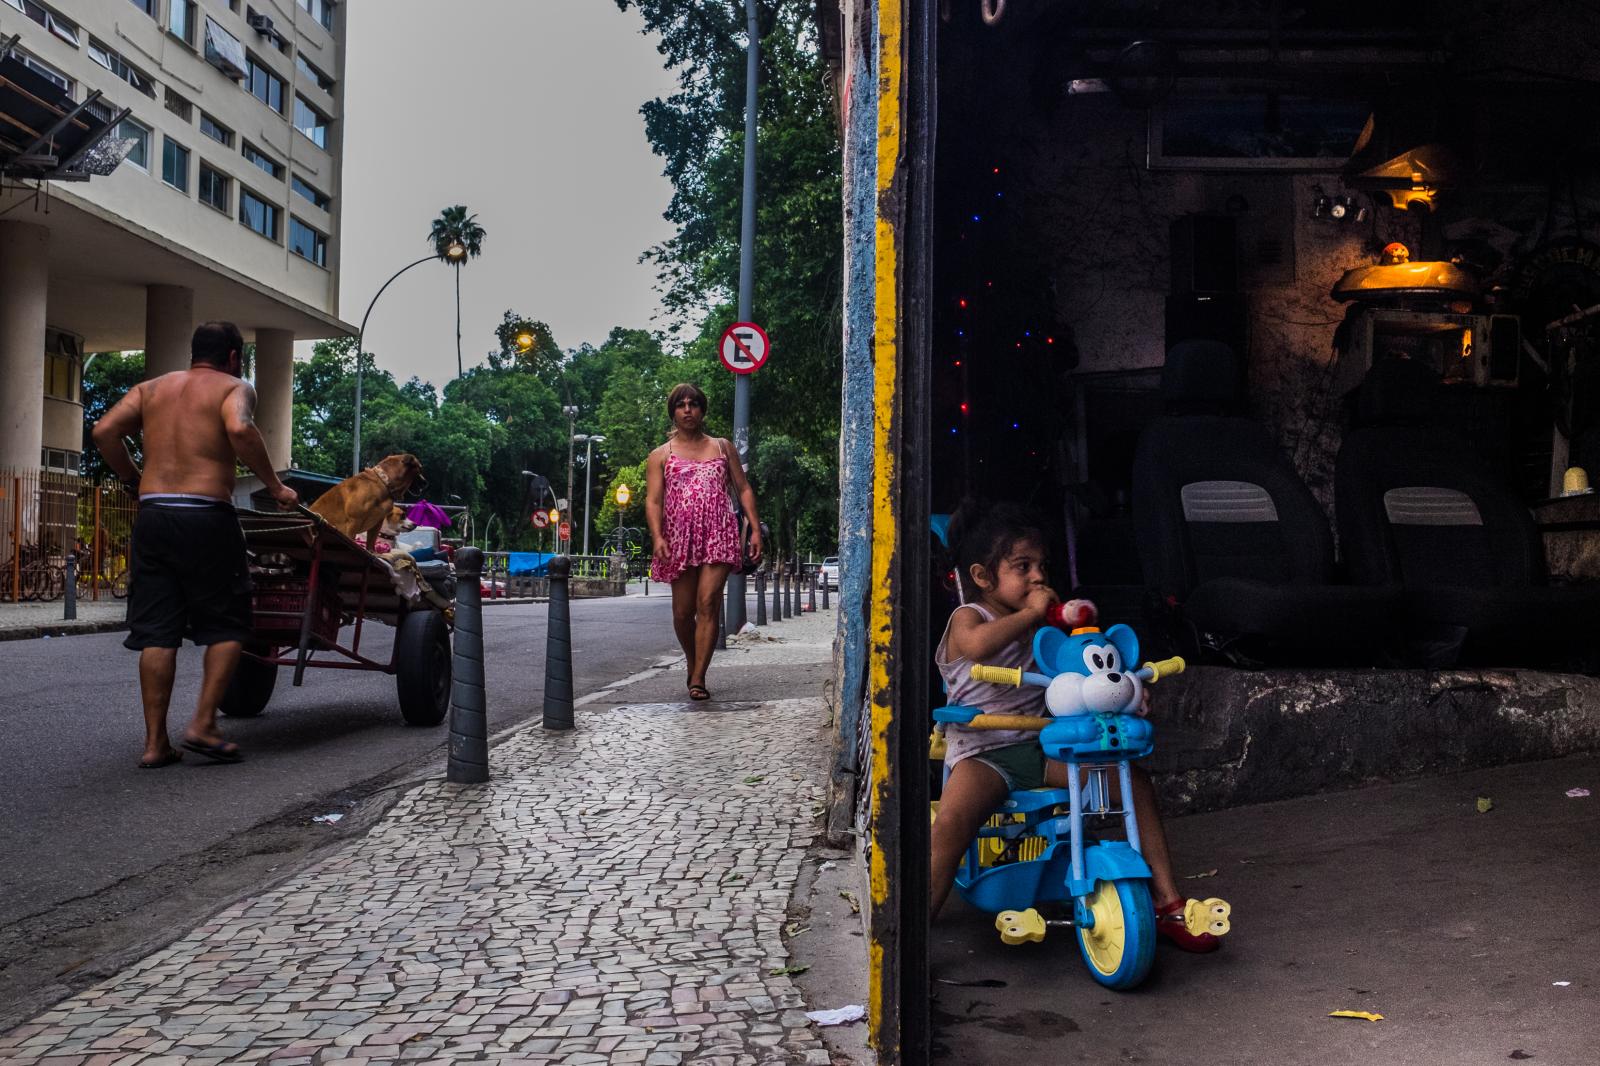 Rio's squatters: reclaiming rights to the city